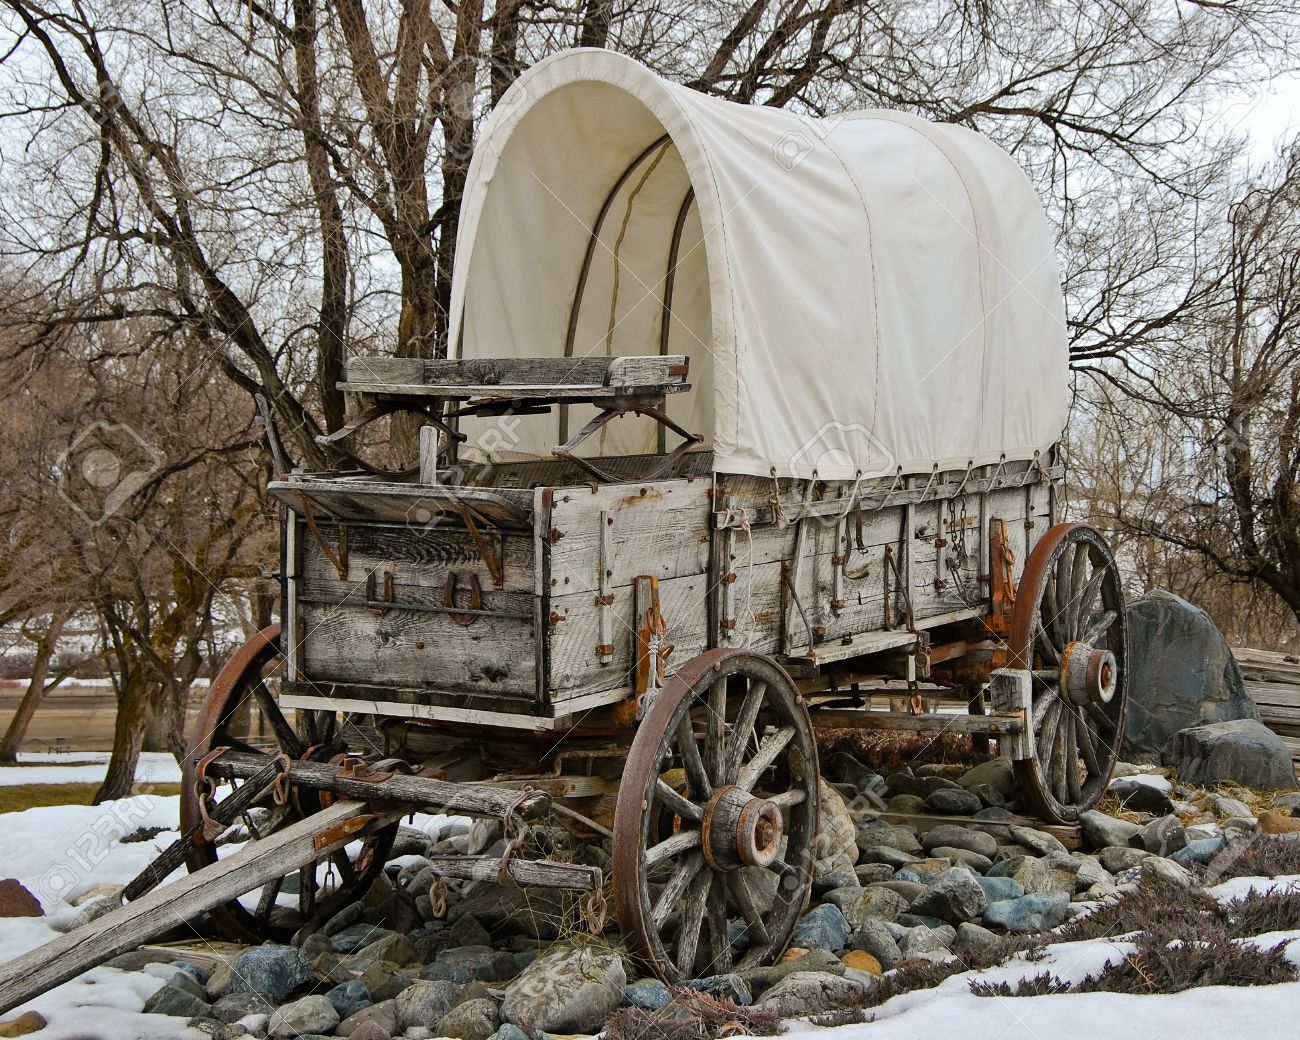 14294252-Covered-wagon-at-Farewell-bend-state-park-in-eastern-Oregon-Stock-Photo